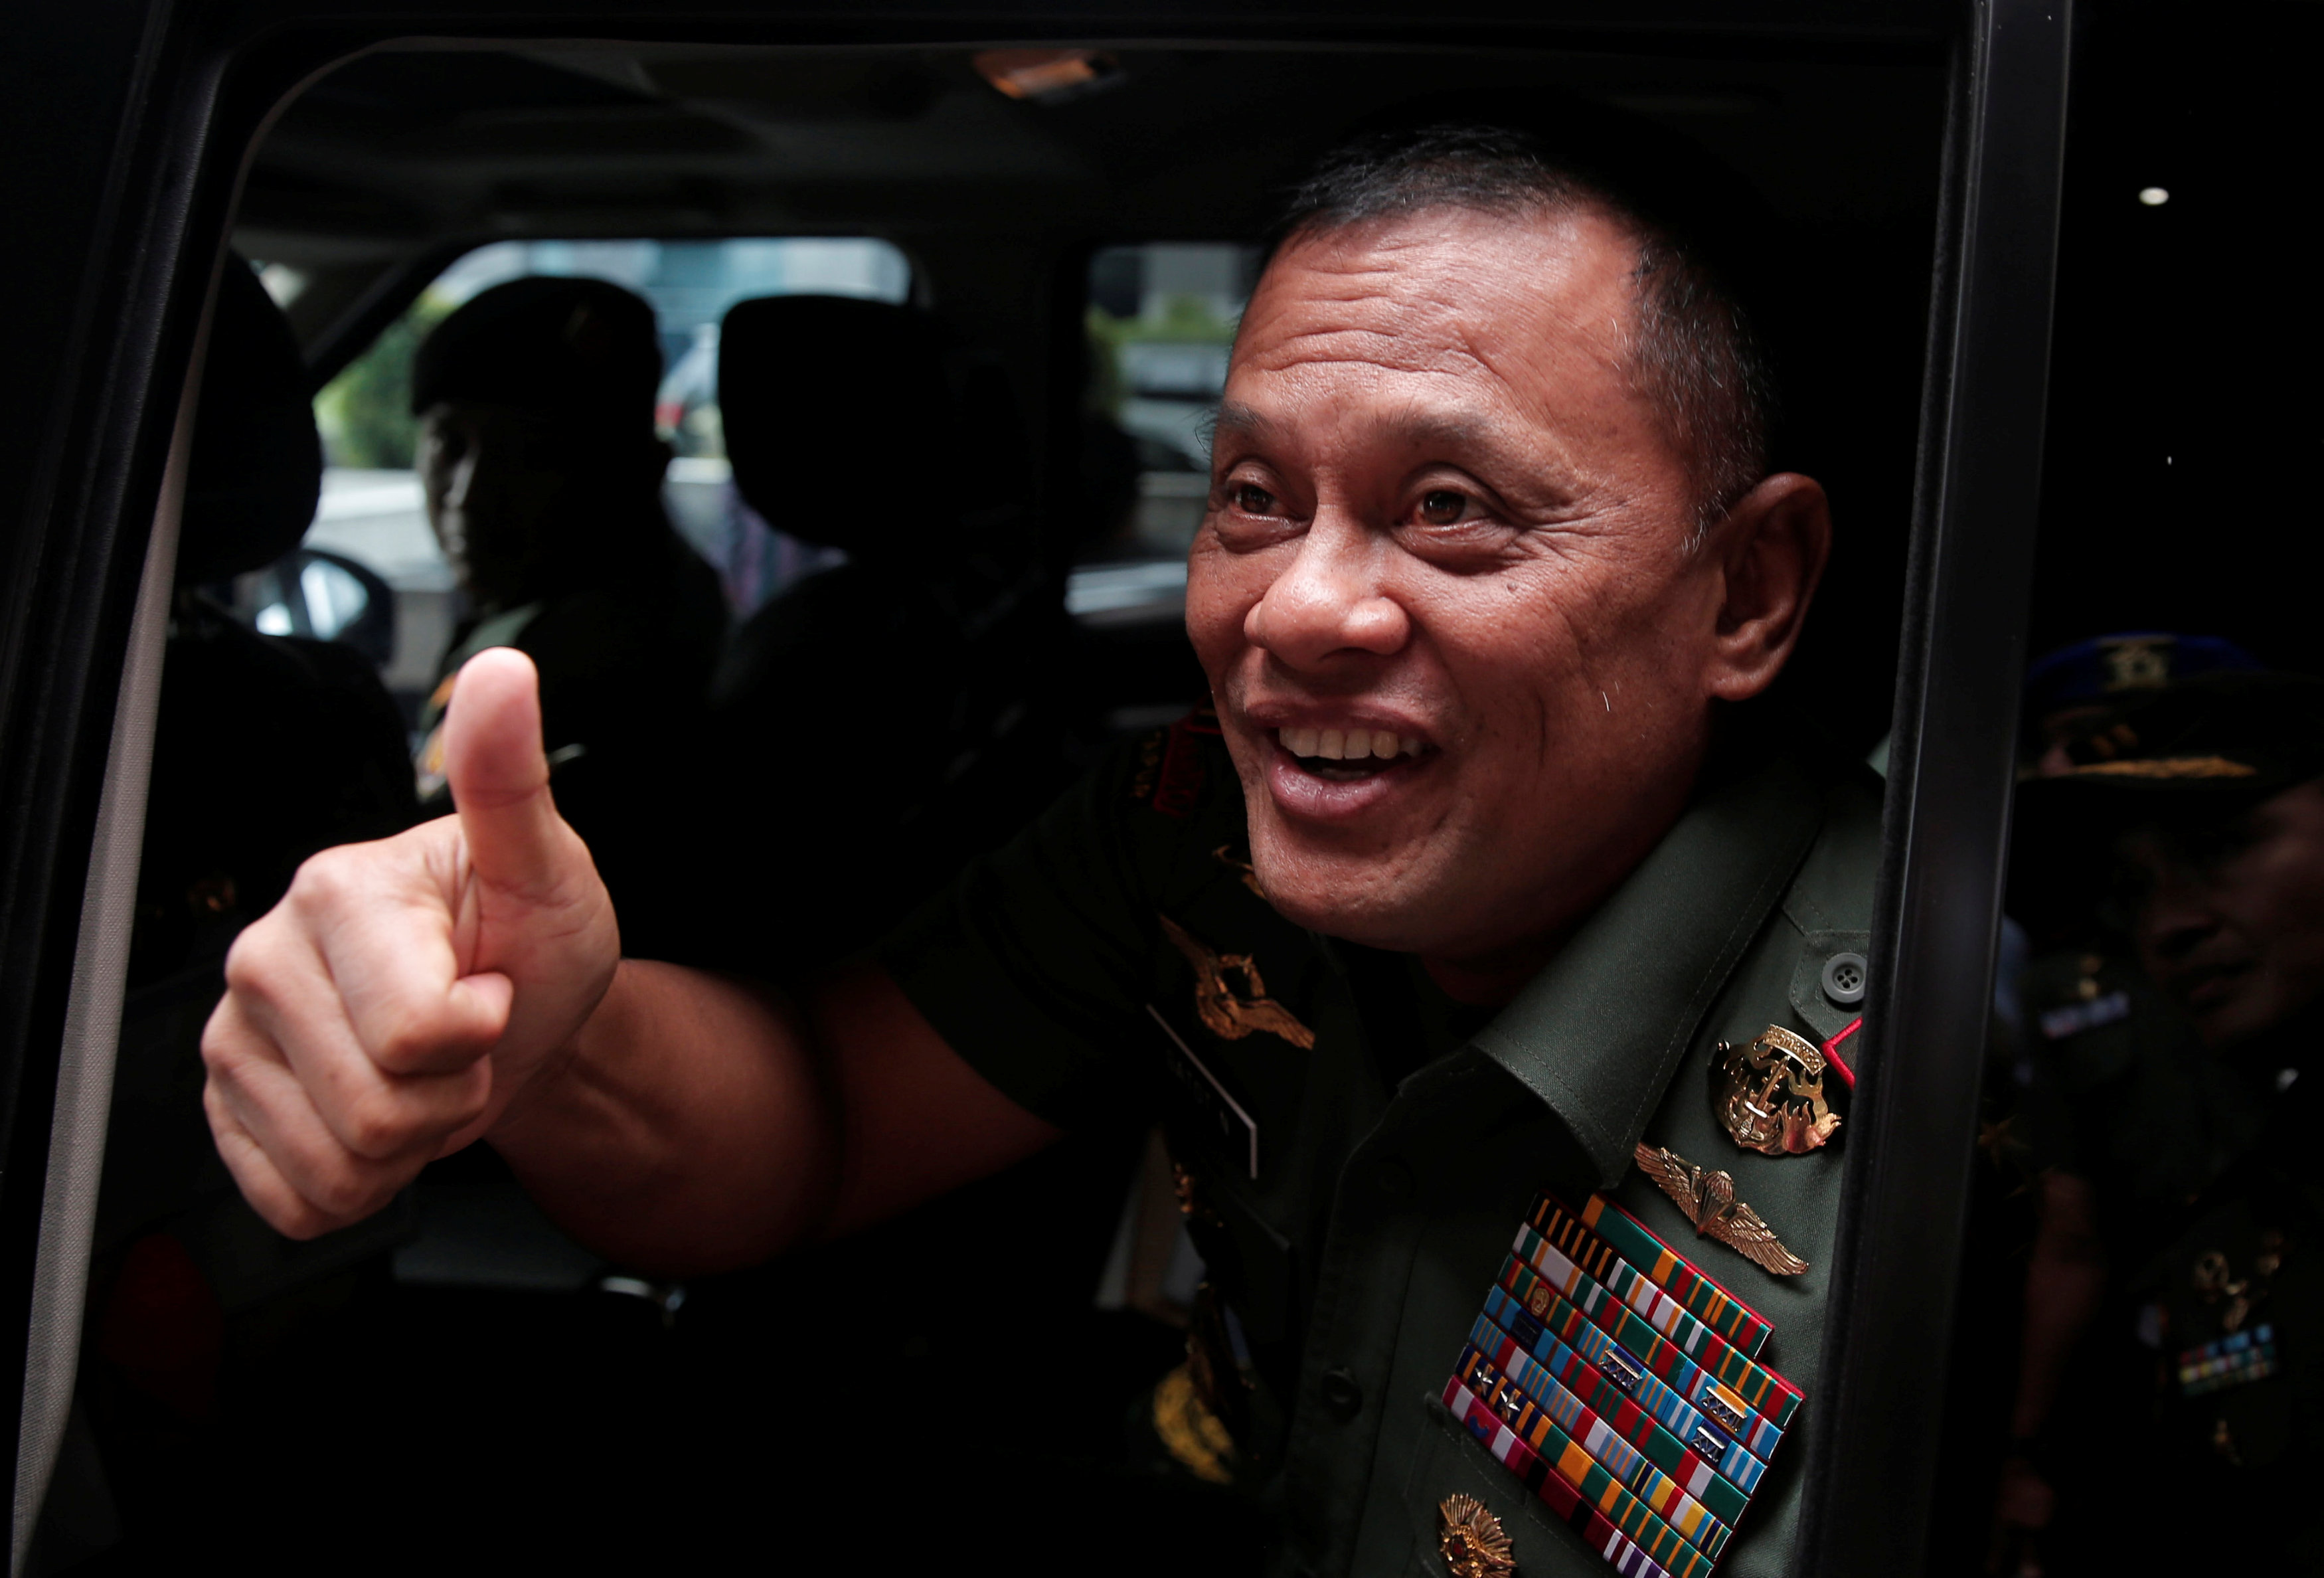 Indonesia accepts apology, awaits explanation why U.S. blocked military chief's travel